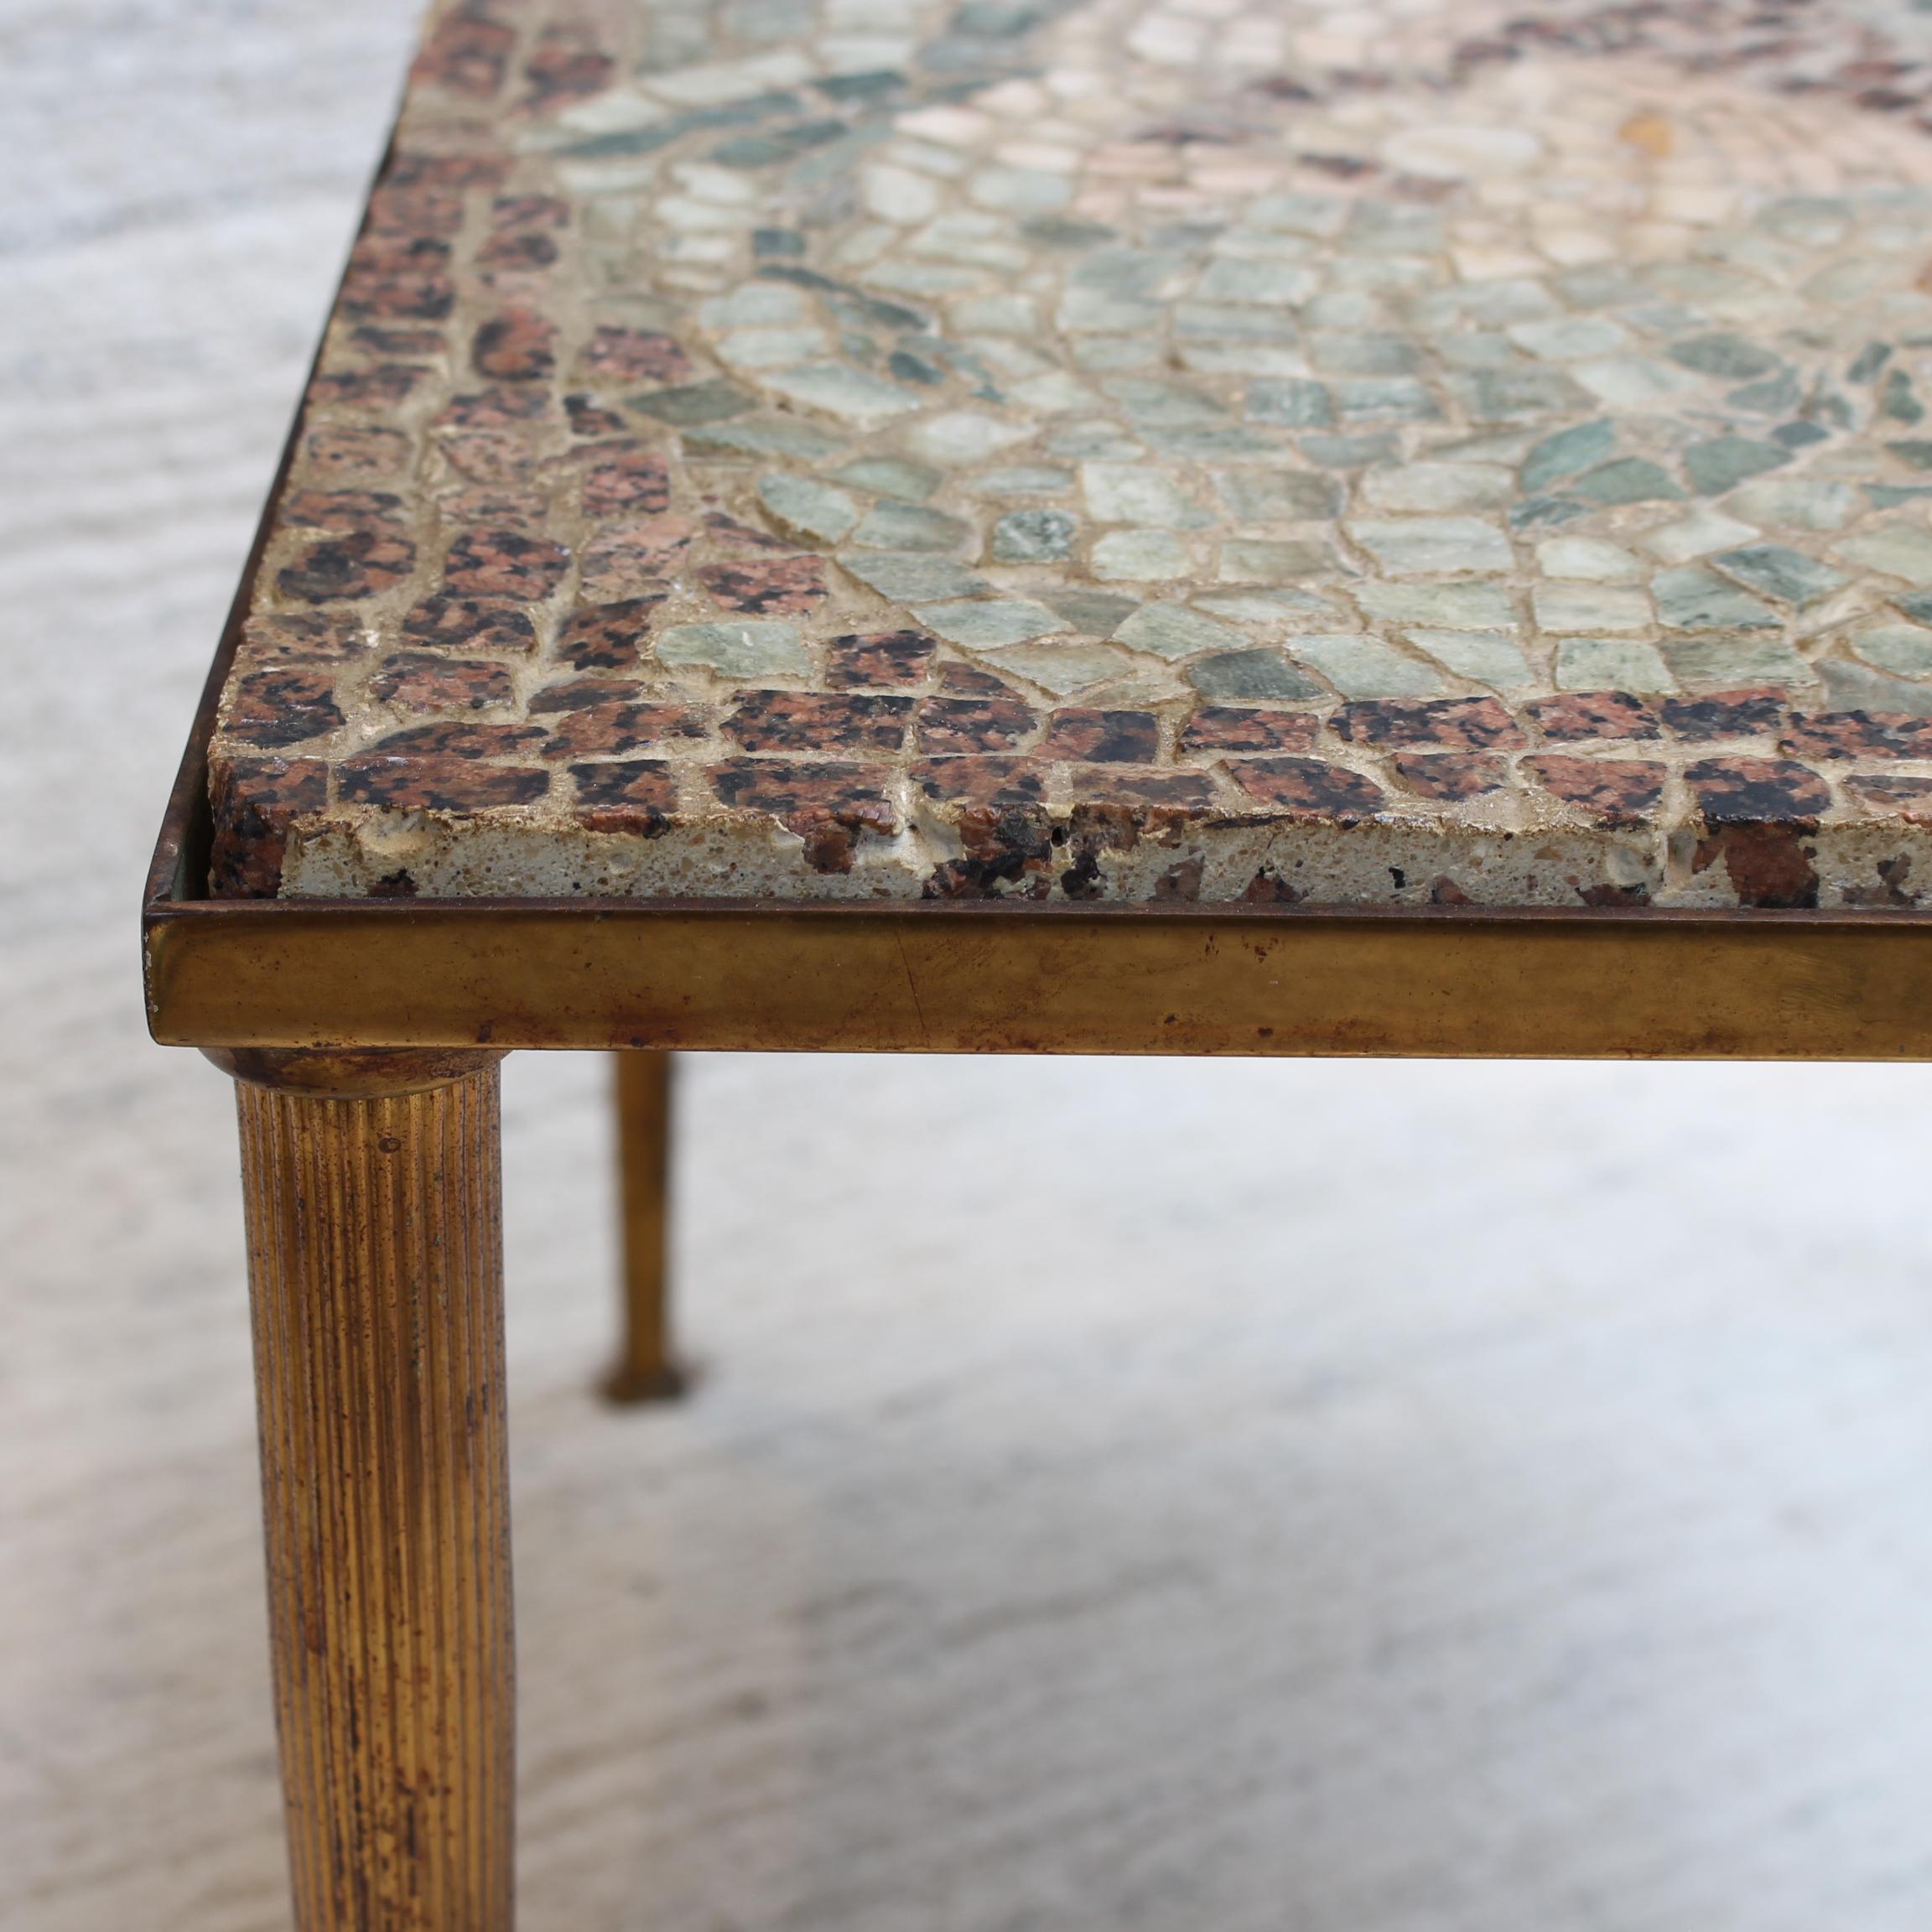 Vintage Low Table with Italian Style Mosaic Top, 'circa 1950s' For Sale 7